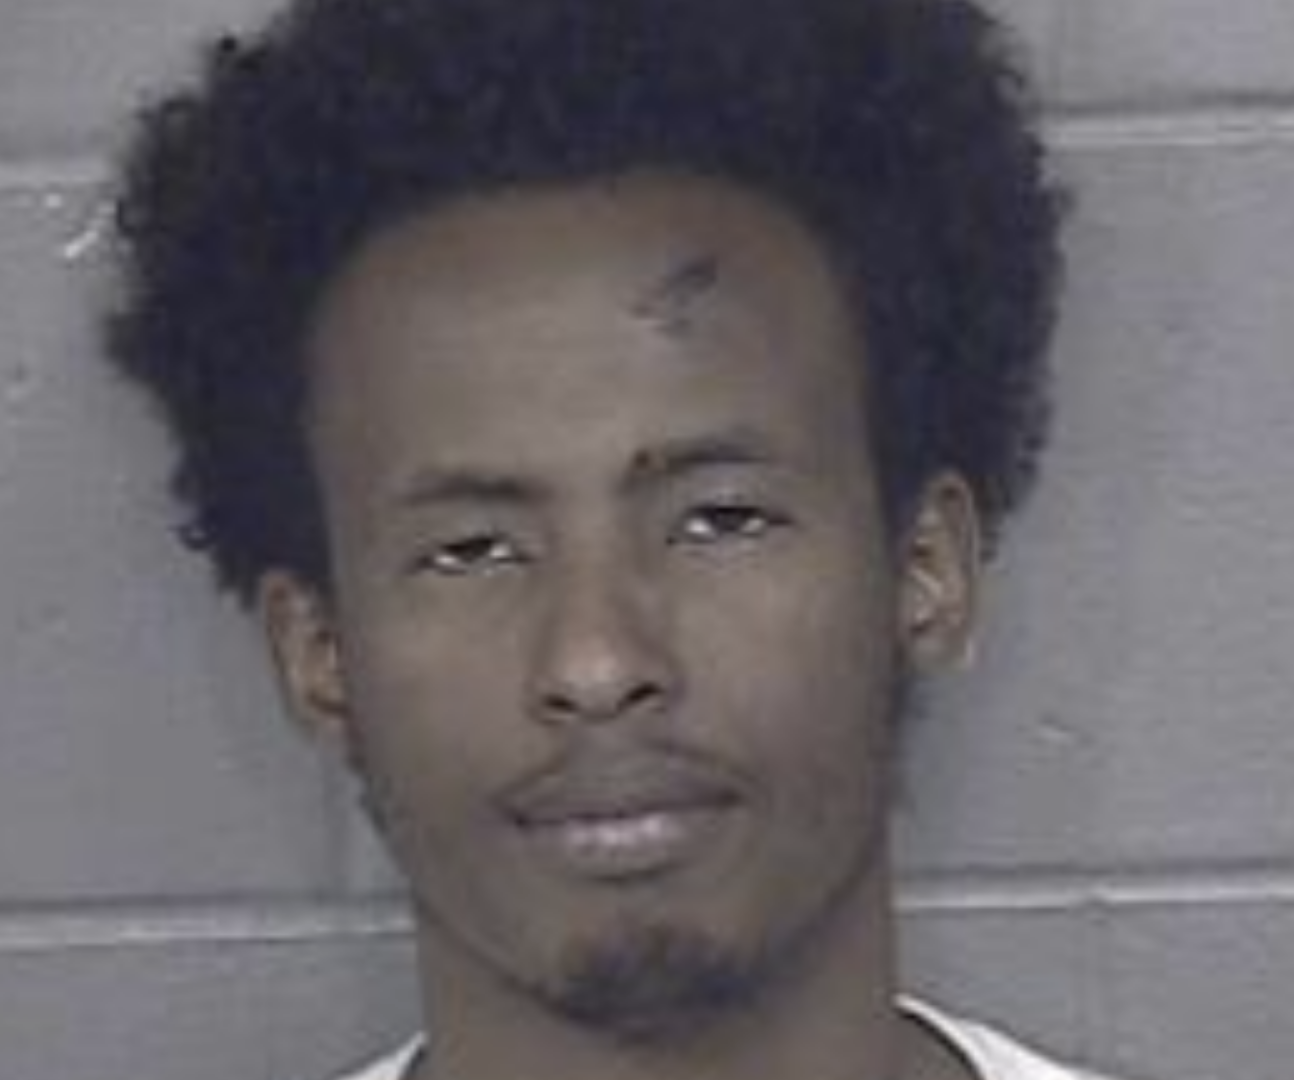 Charges filed in Saturday evening shooting near 9th & Woodland